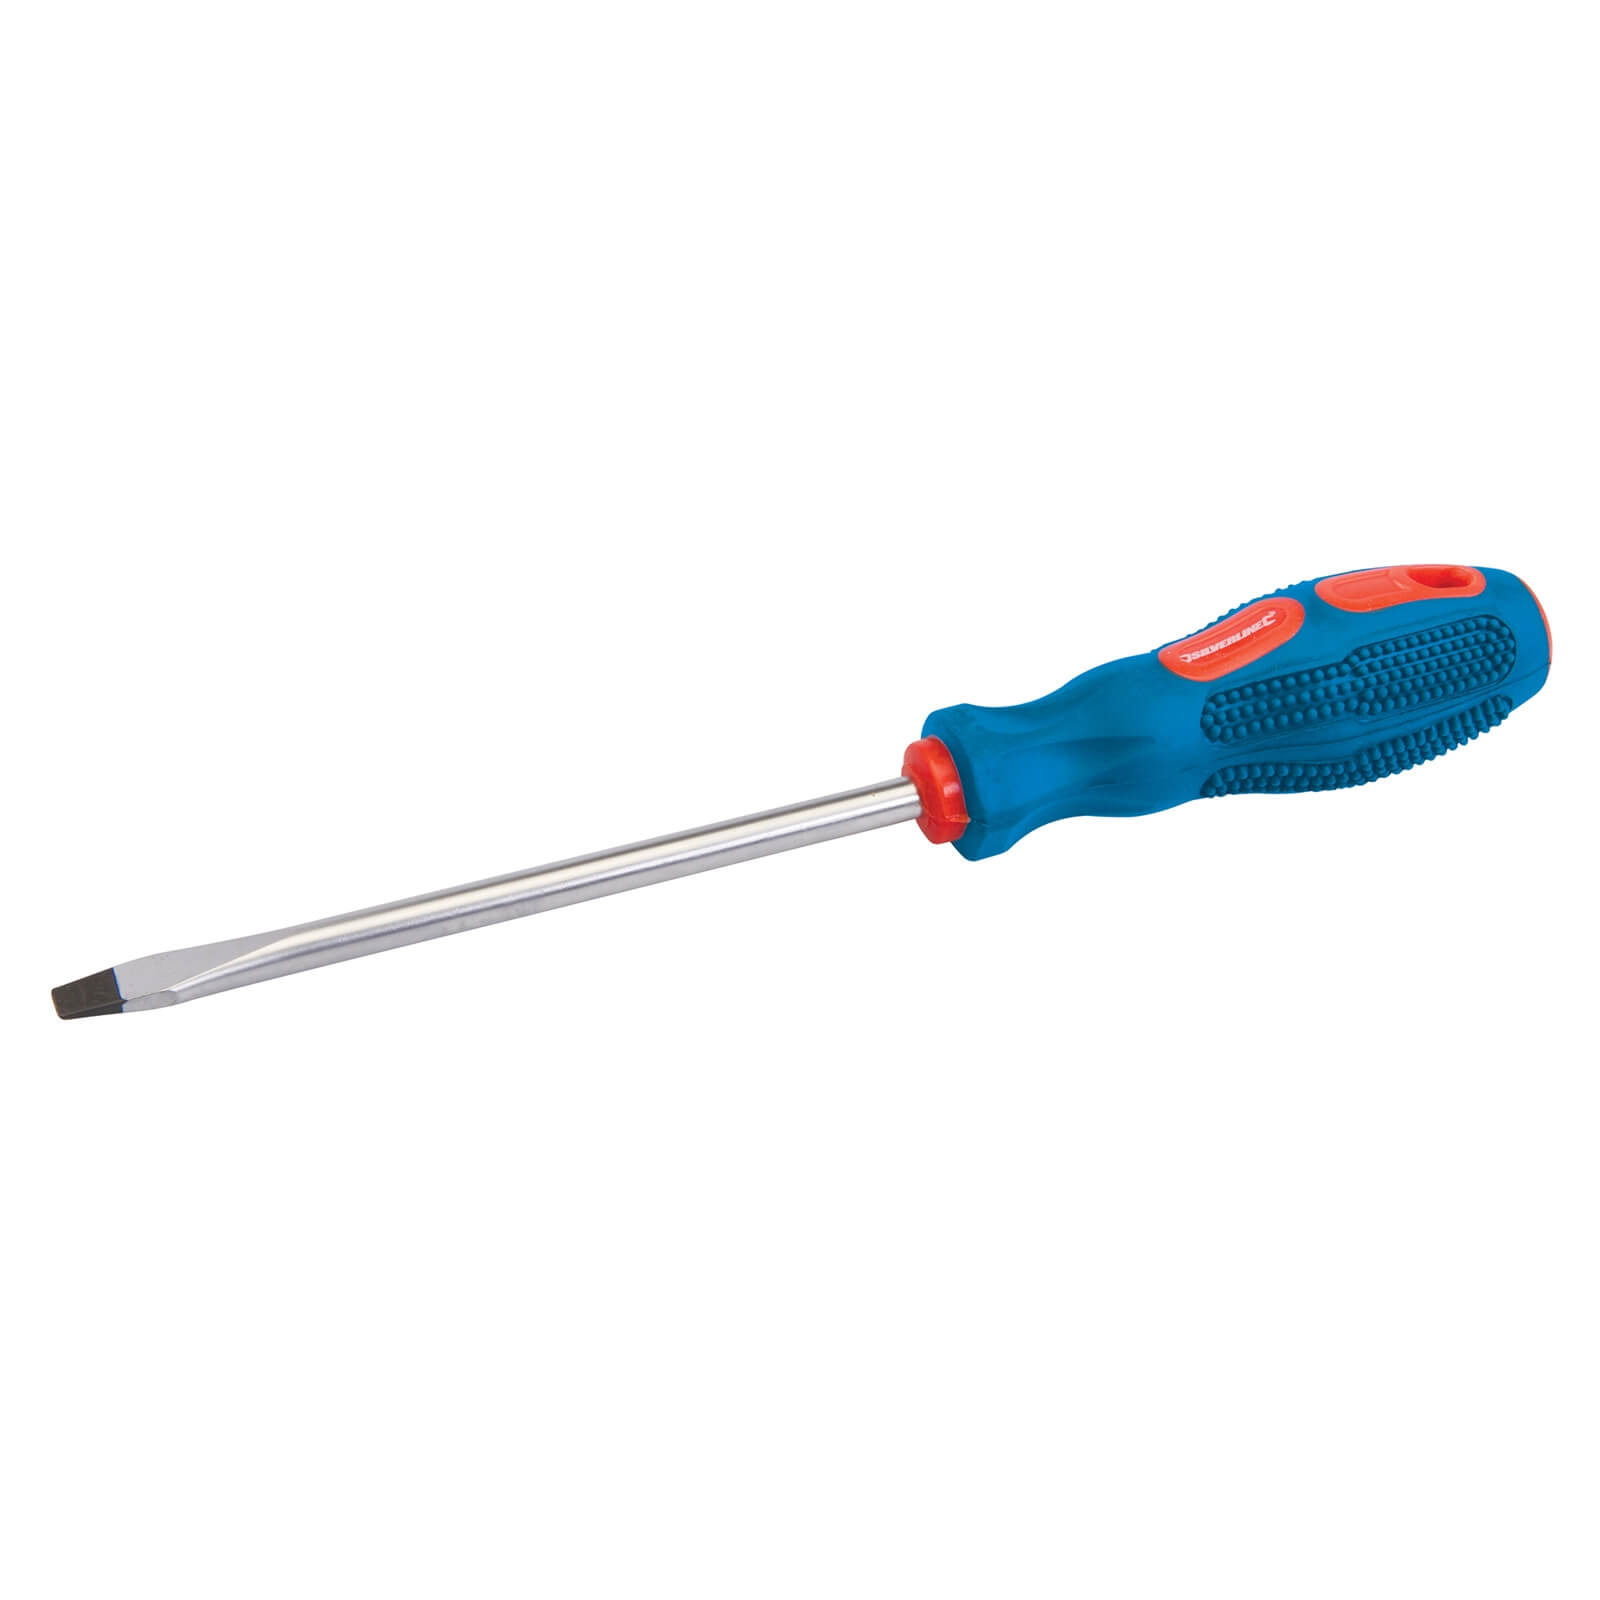 Silverline General Purpose Screwdriver Slotted Flared 8 x 150mm